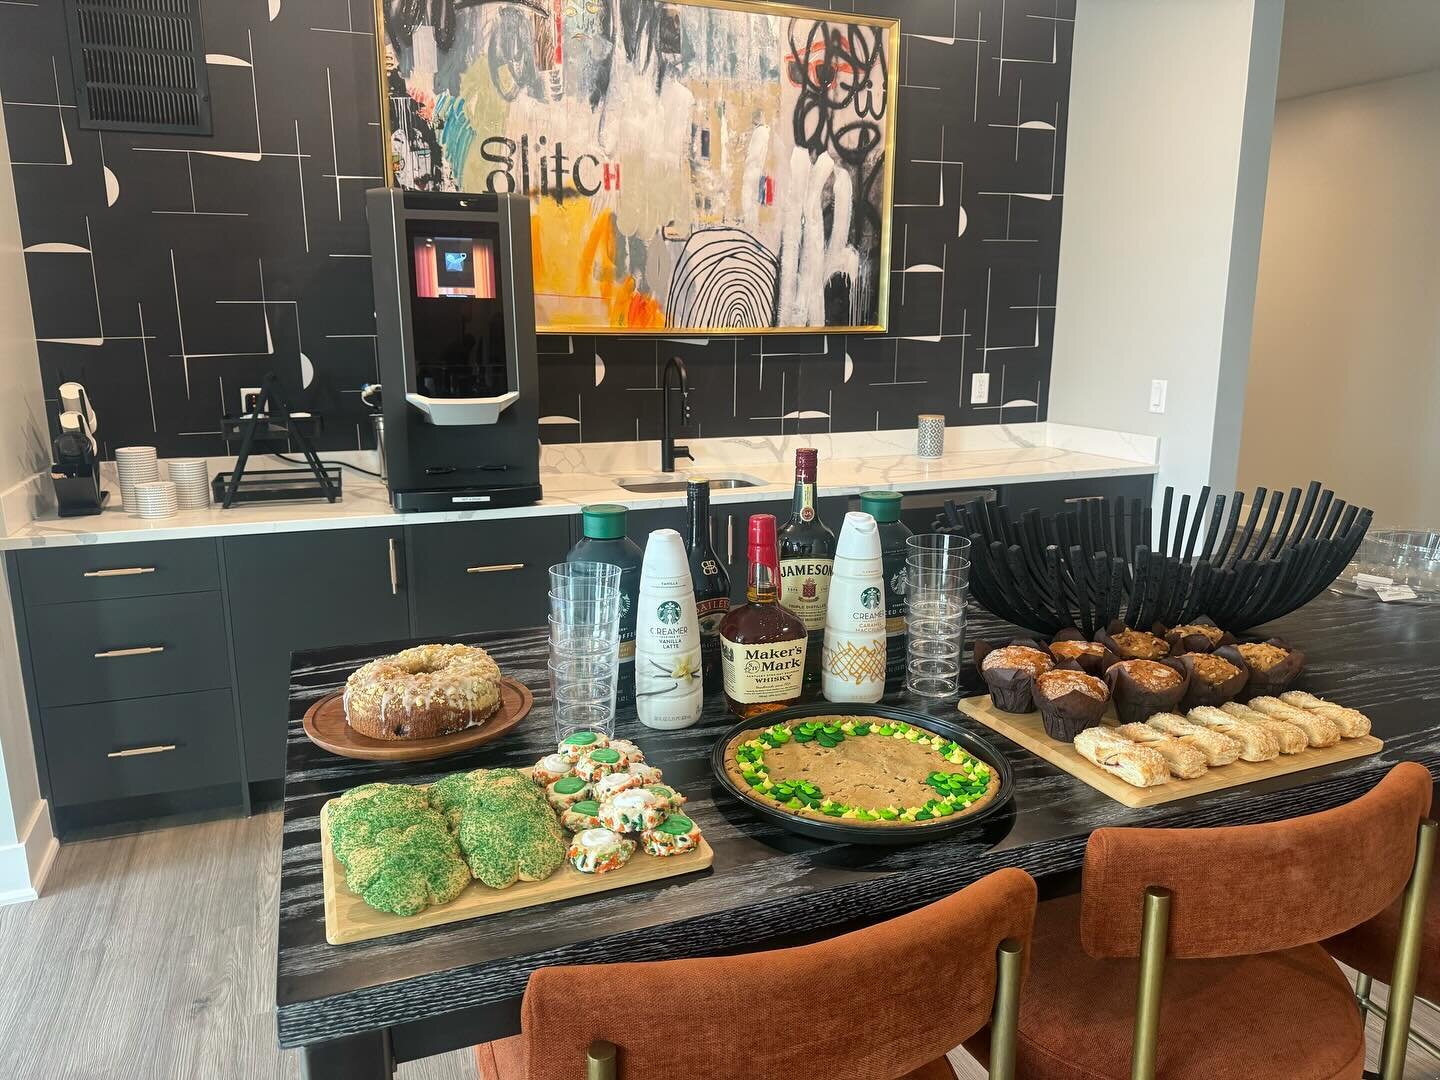 Spiked Irish coffee to celebrate Saint Patrick&rsquo;s day with our residents! 🍀💚 Did you know we host two events every month? Come join us! 🥂🍾 #residentappreciation #saintpatricksday #columbusohio #luxuryapartments